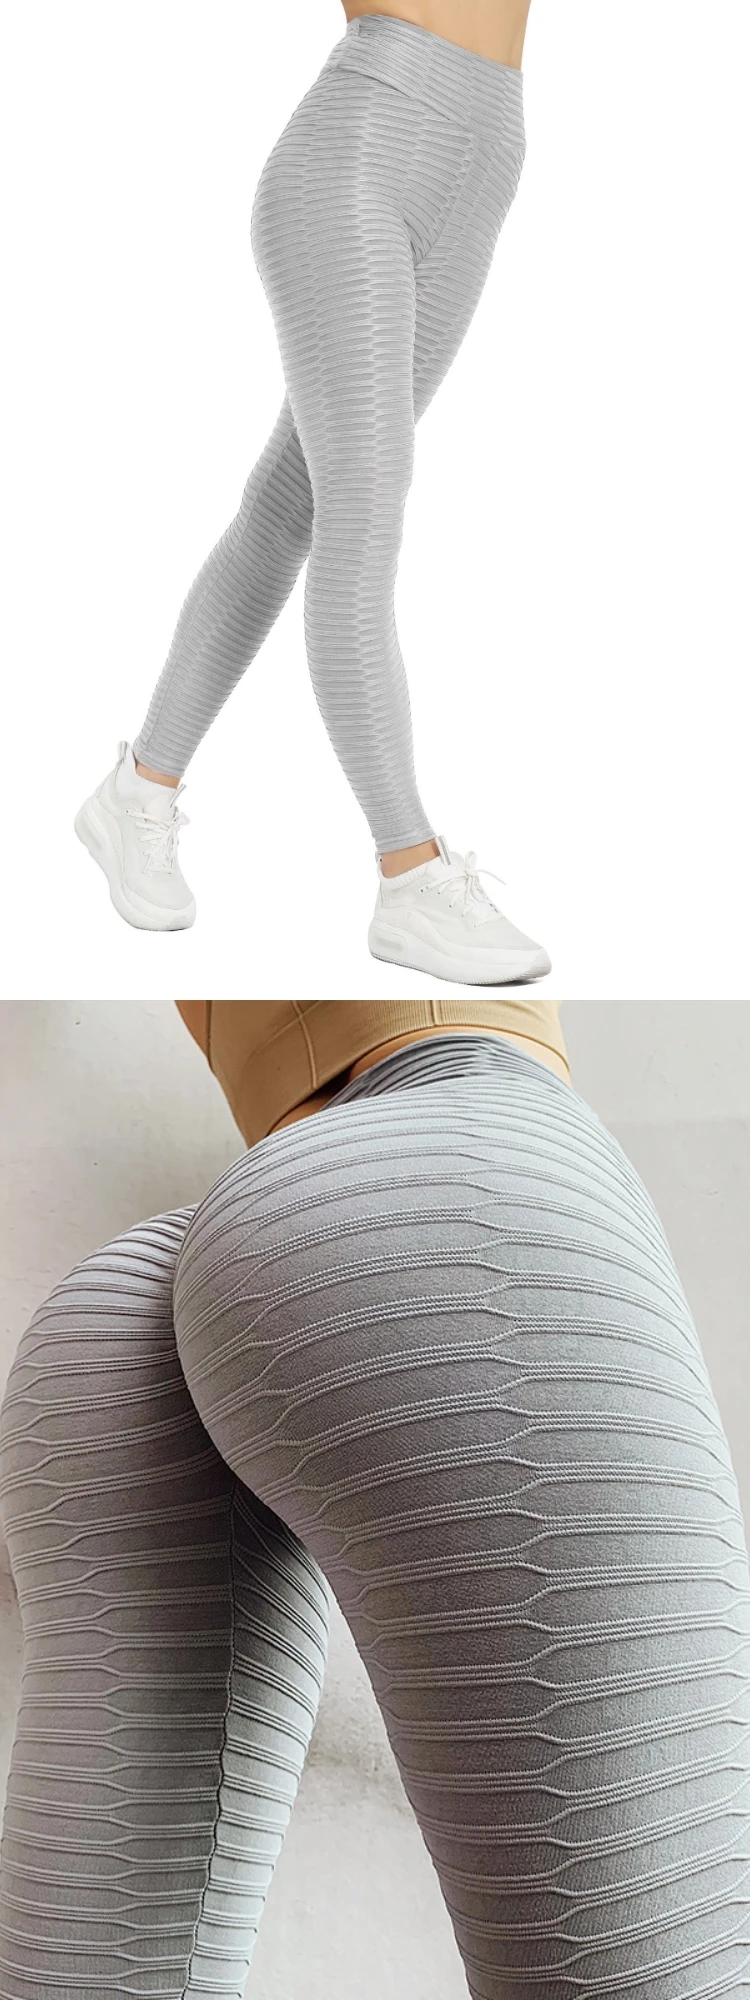 Wholesales 2019 New Fashion Bubble Textured Fitness Gym Activewear Sexy ...